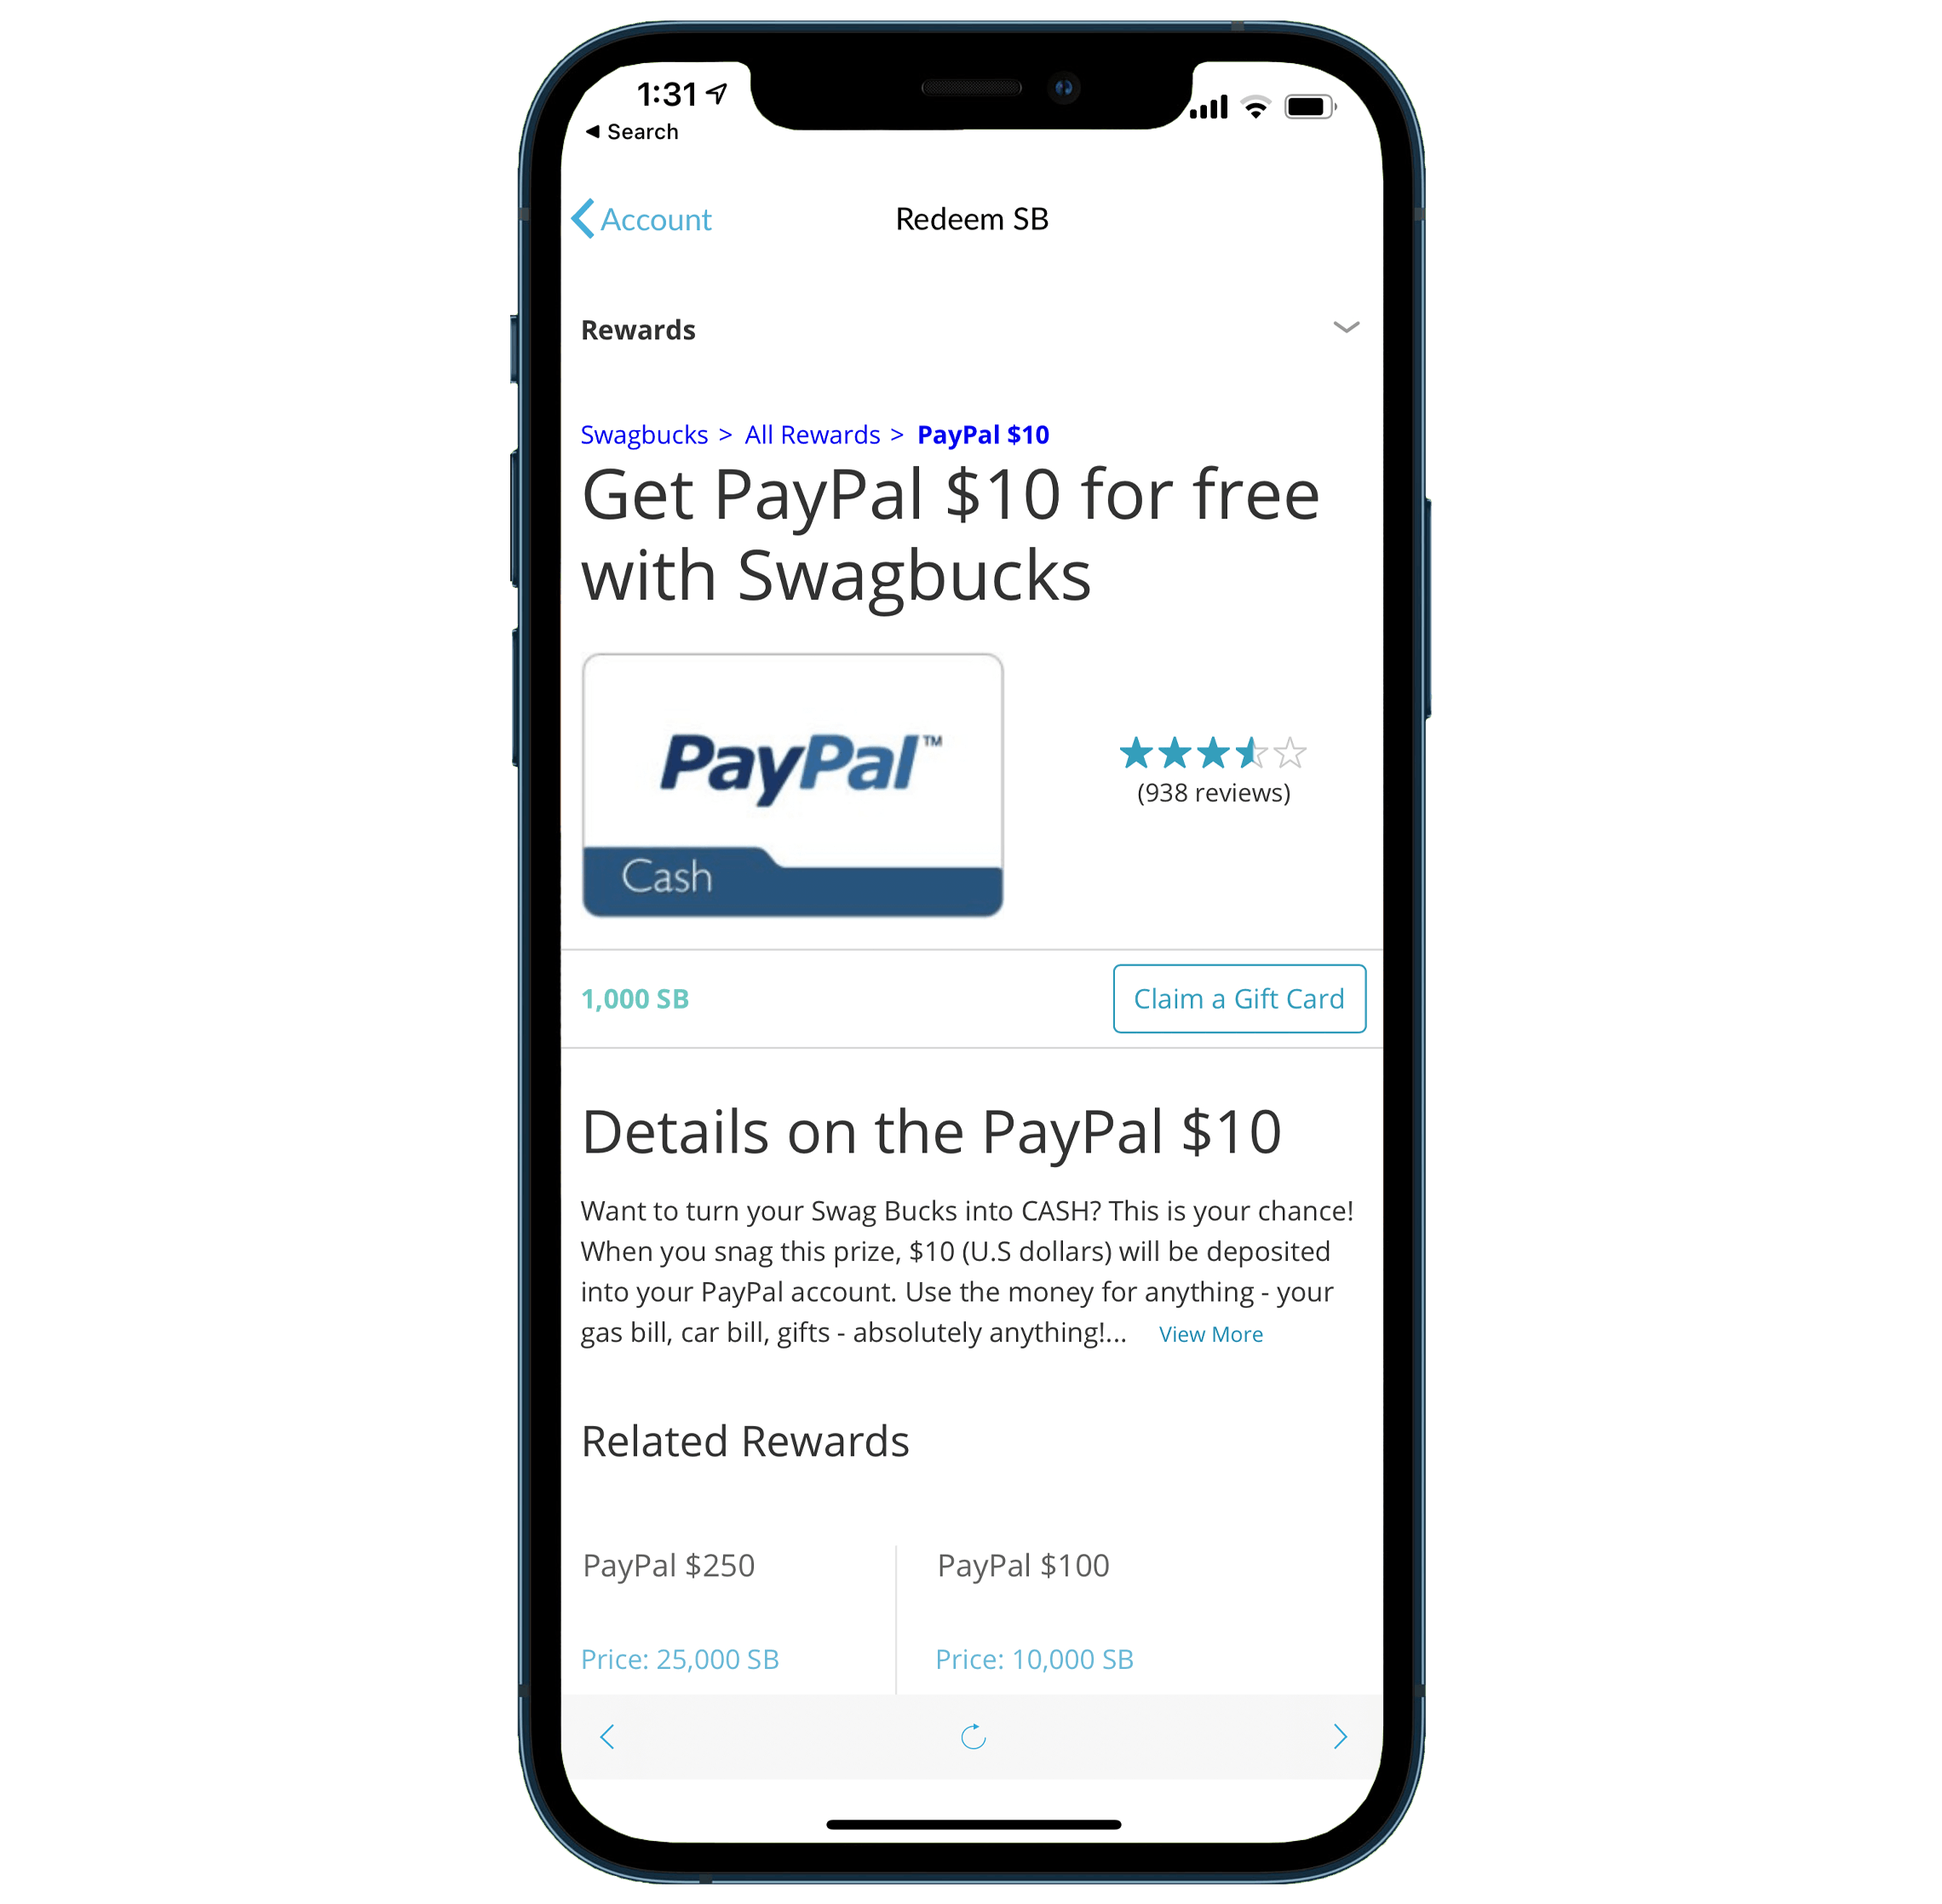 Swaybucks app, Paypal cash out page.